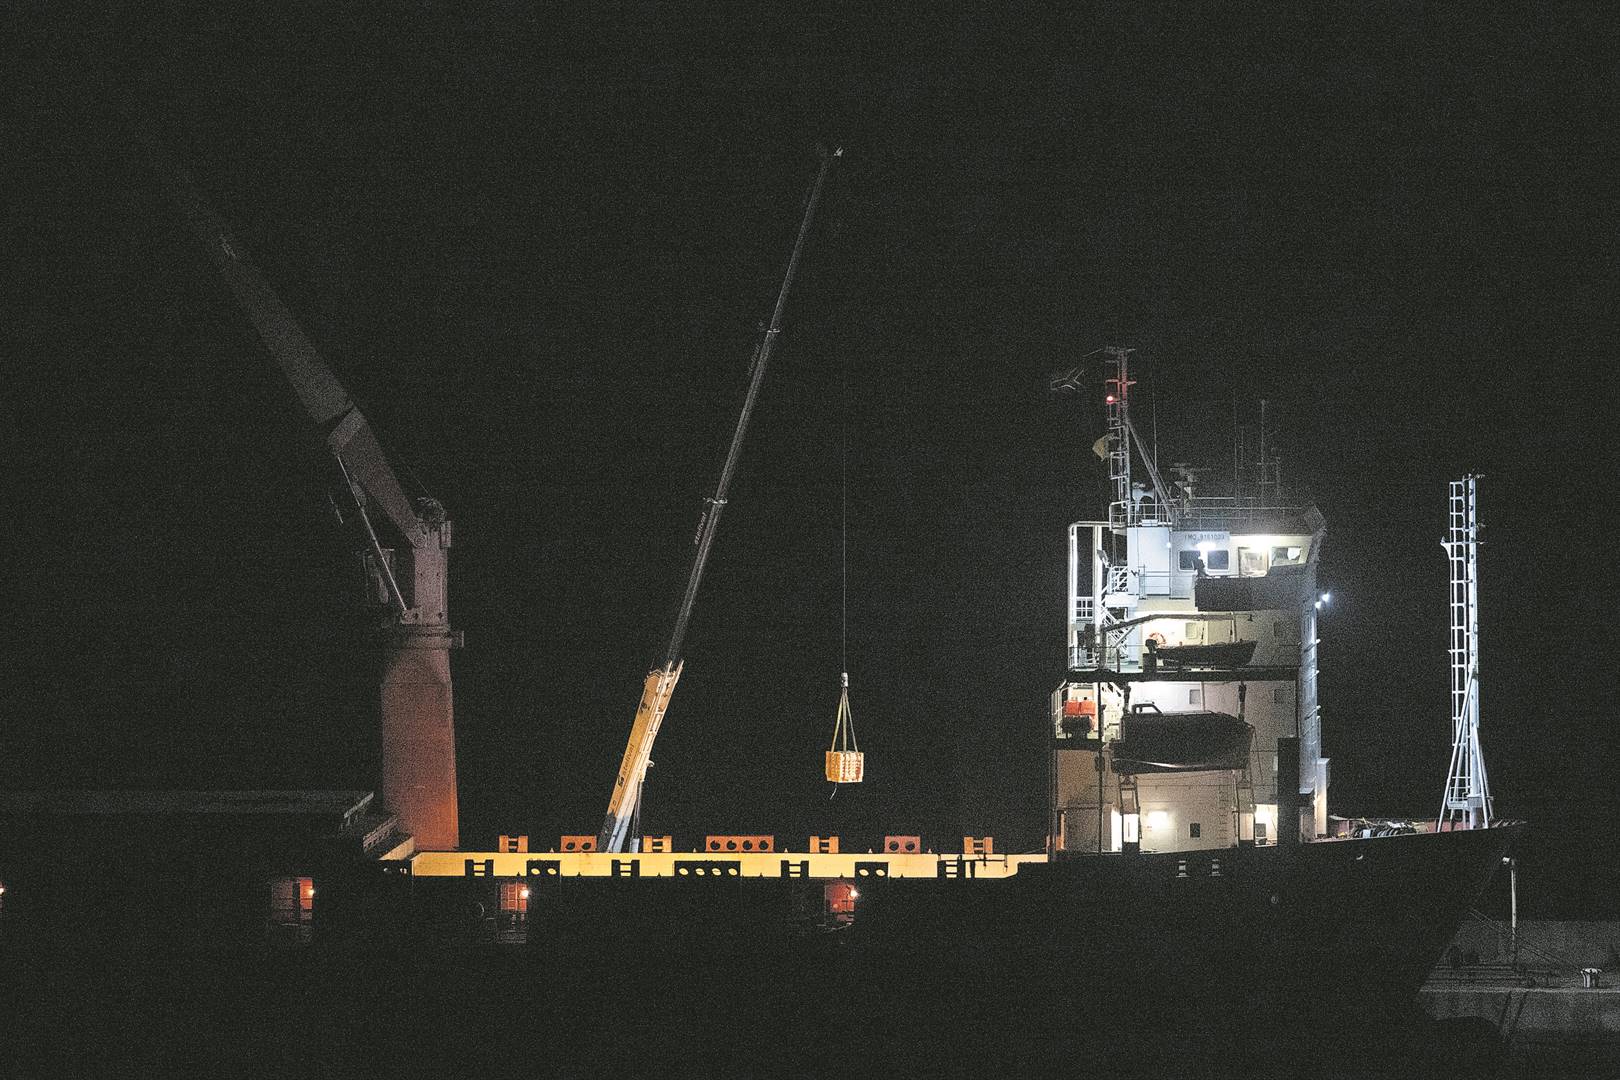 Cargo being offloaded from the Lady R under cover of darkness.